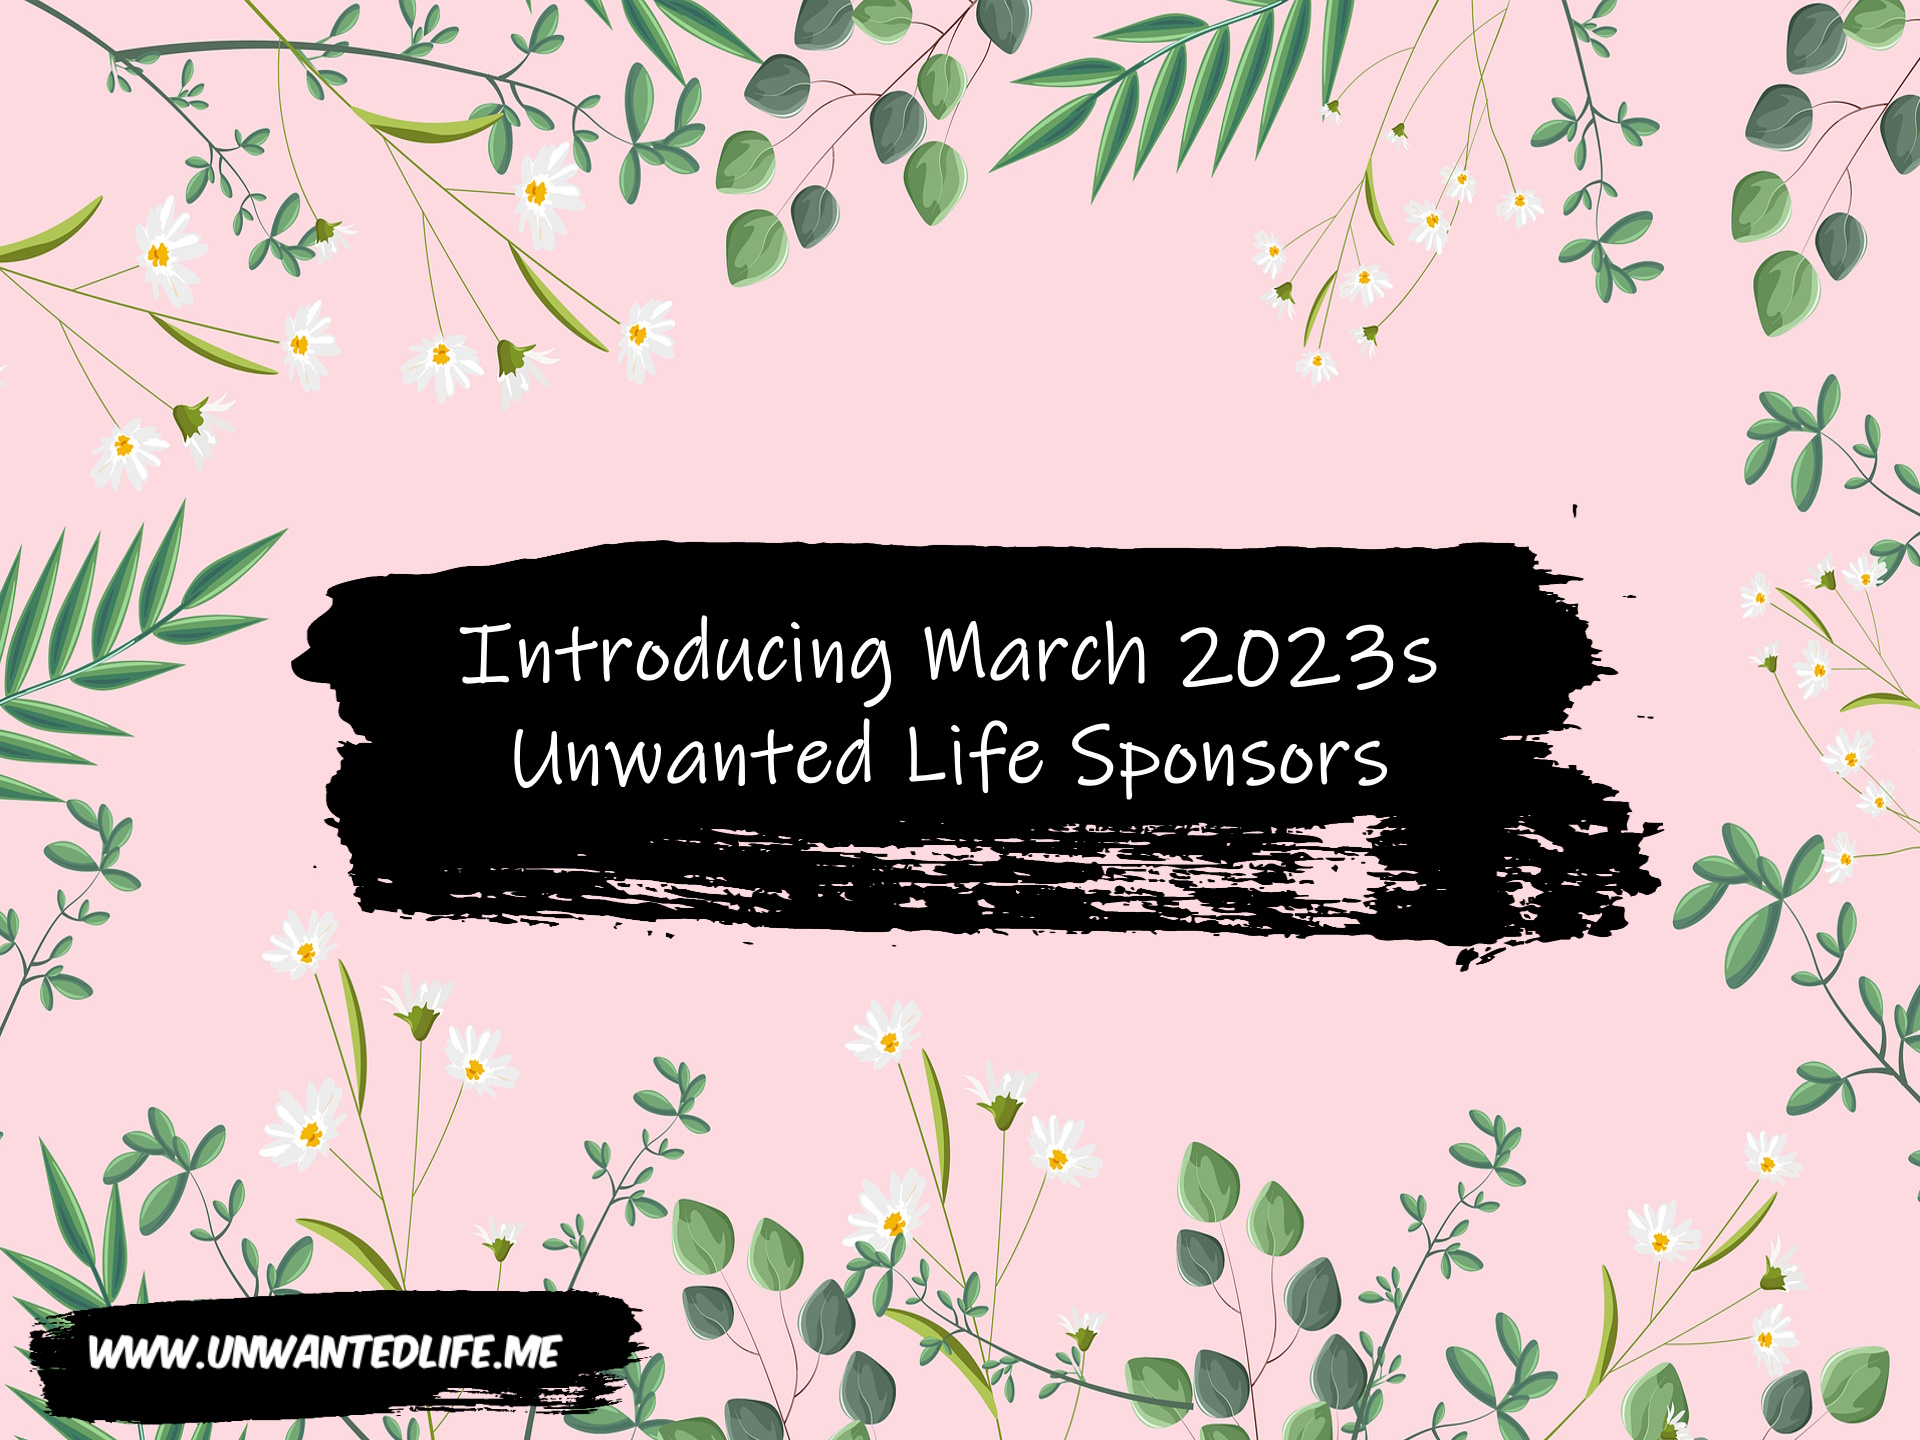 A pink background with a flower border and in the middle of the image is the title of the article - Introducing March 2023s Unwanted Life Sponsors